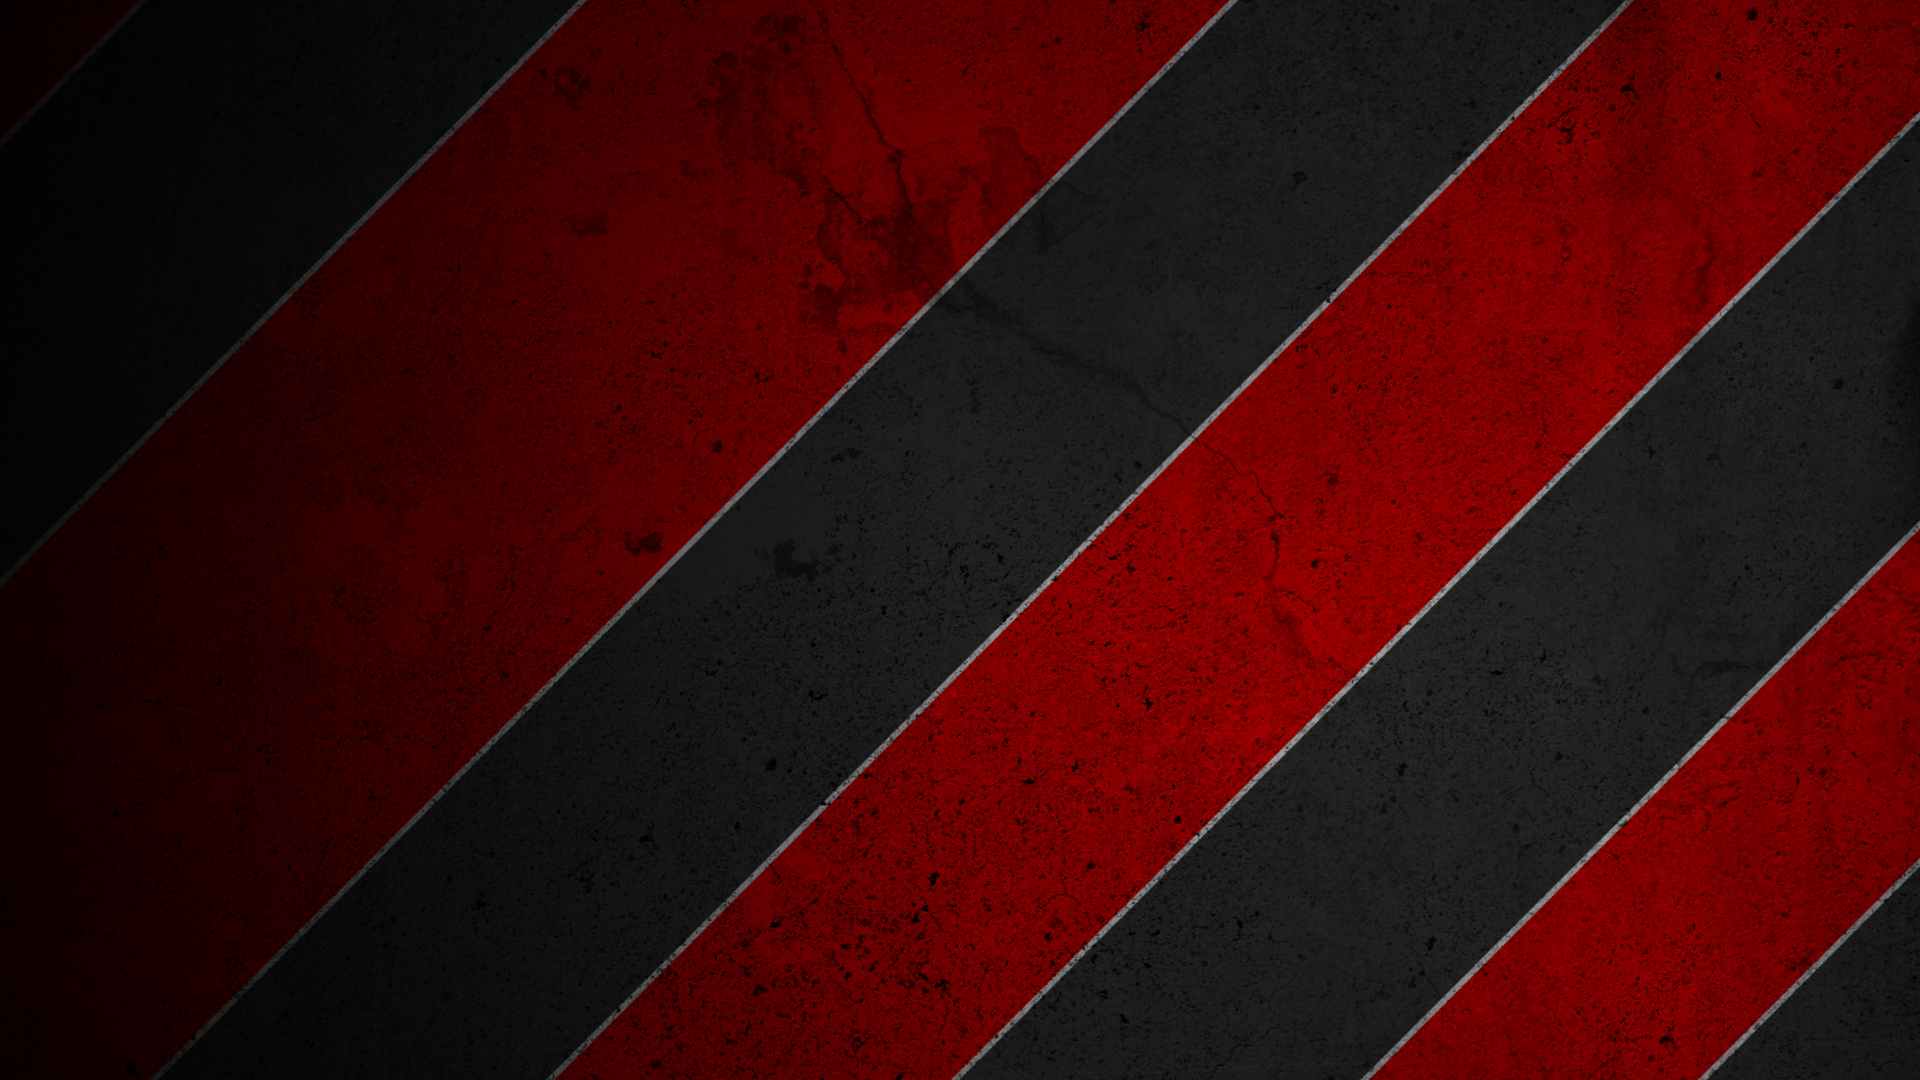 Black And Red Wallpaper Cool